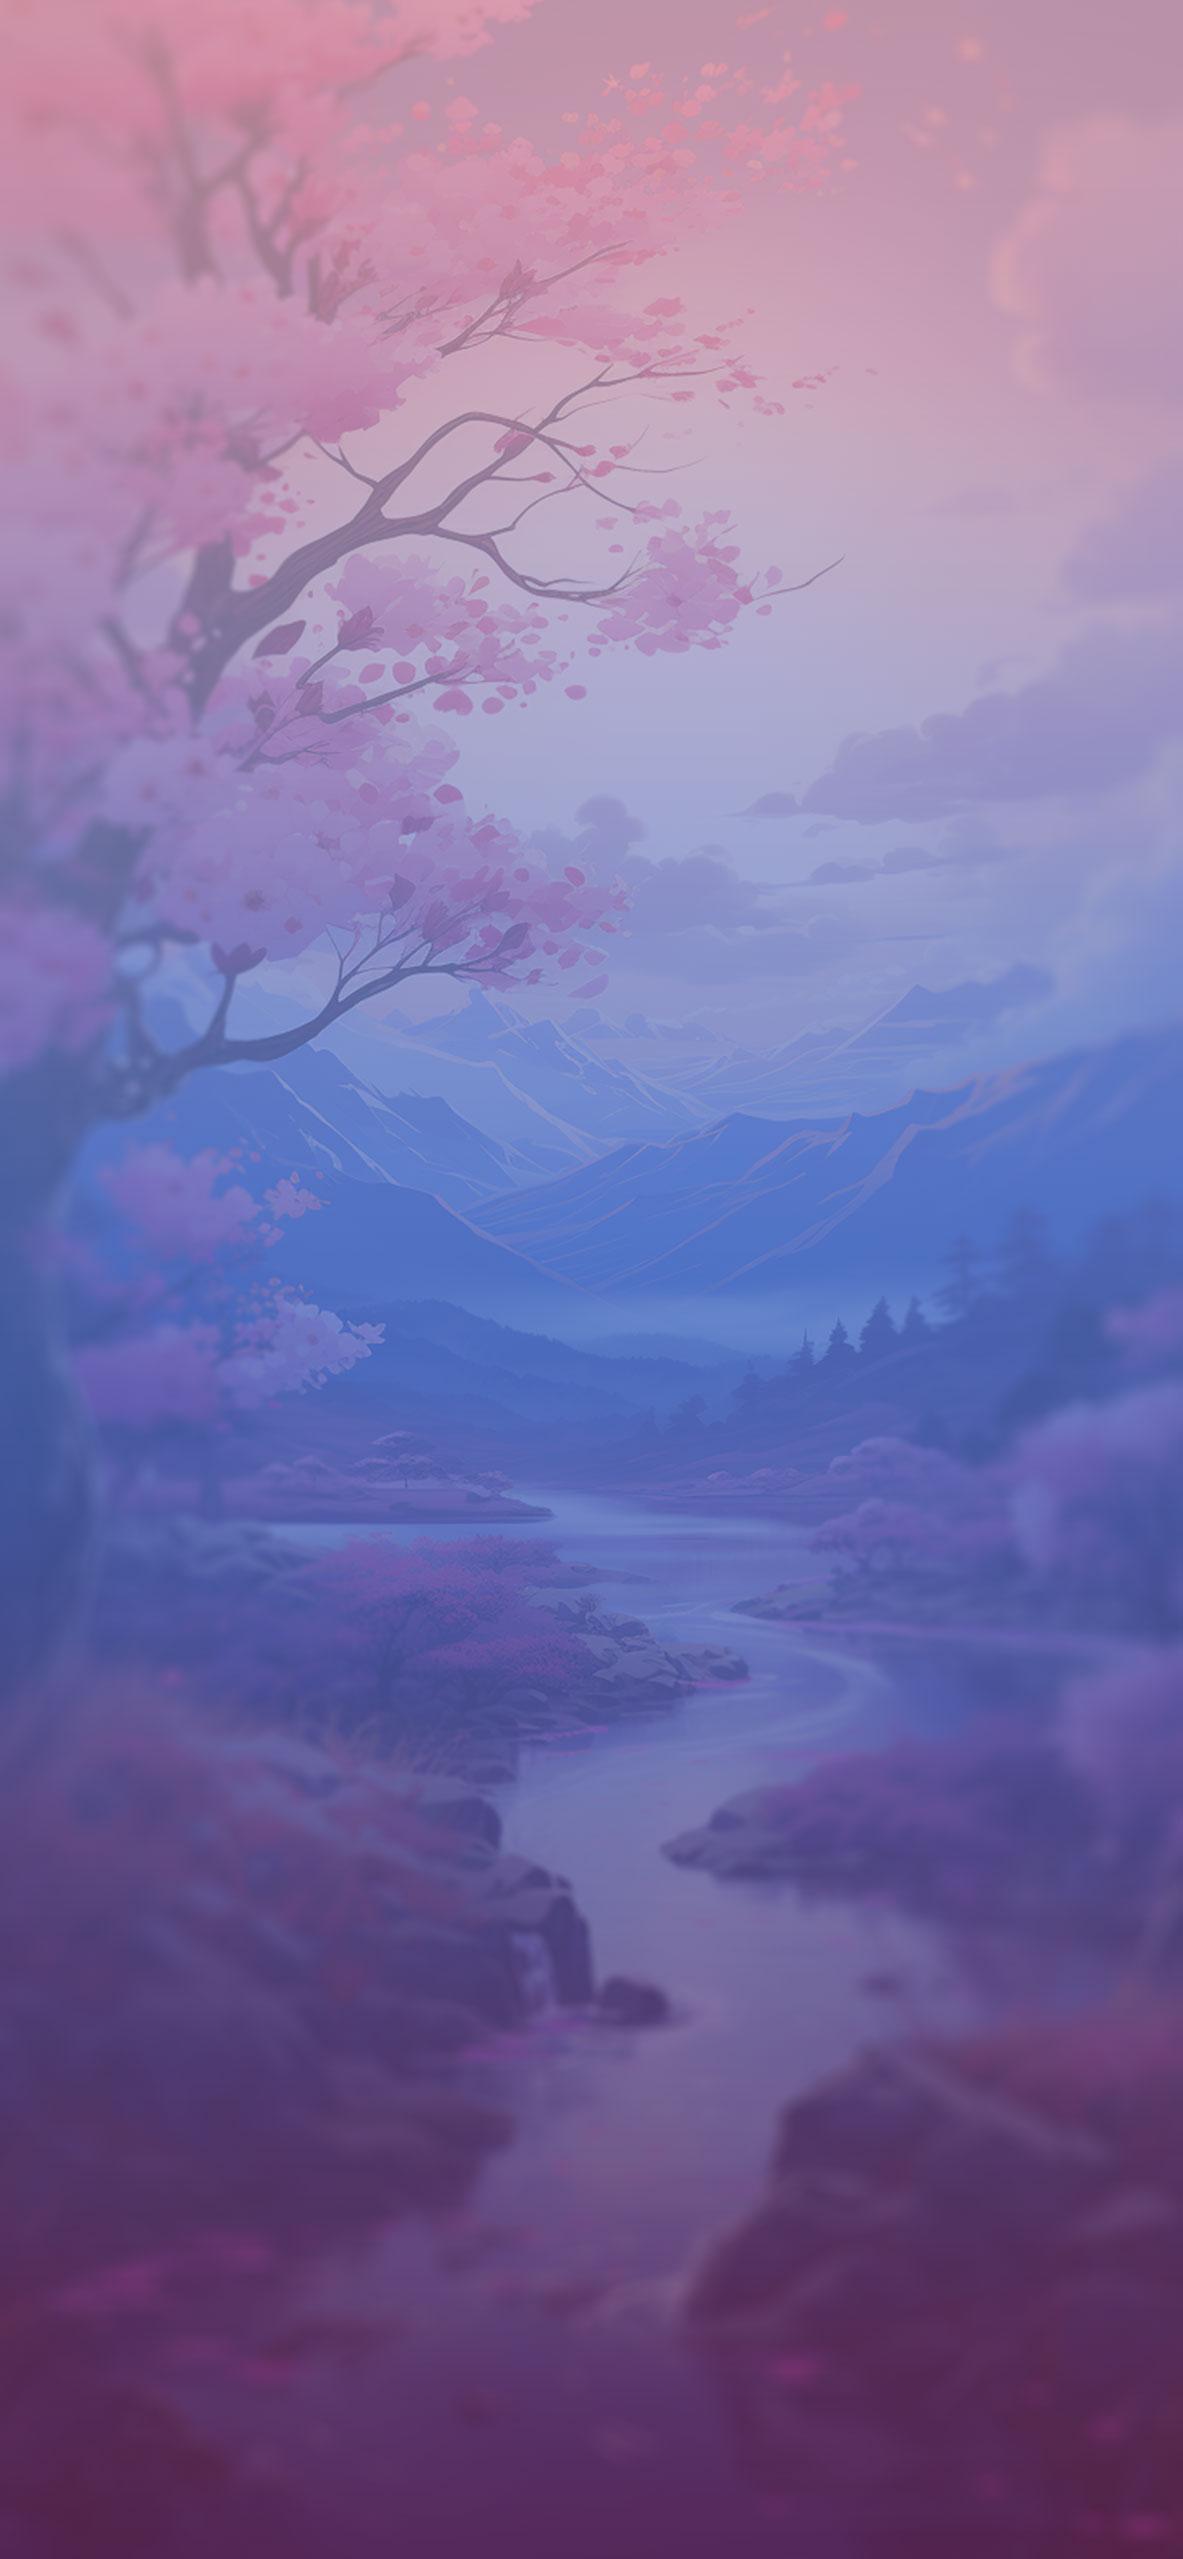 Landscape Mountains River Anime Wallpaper For iPhone HD